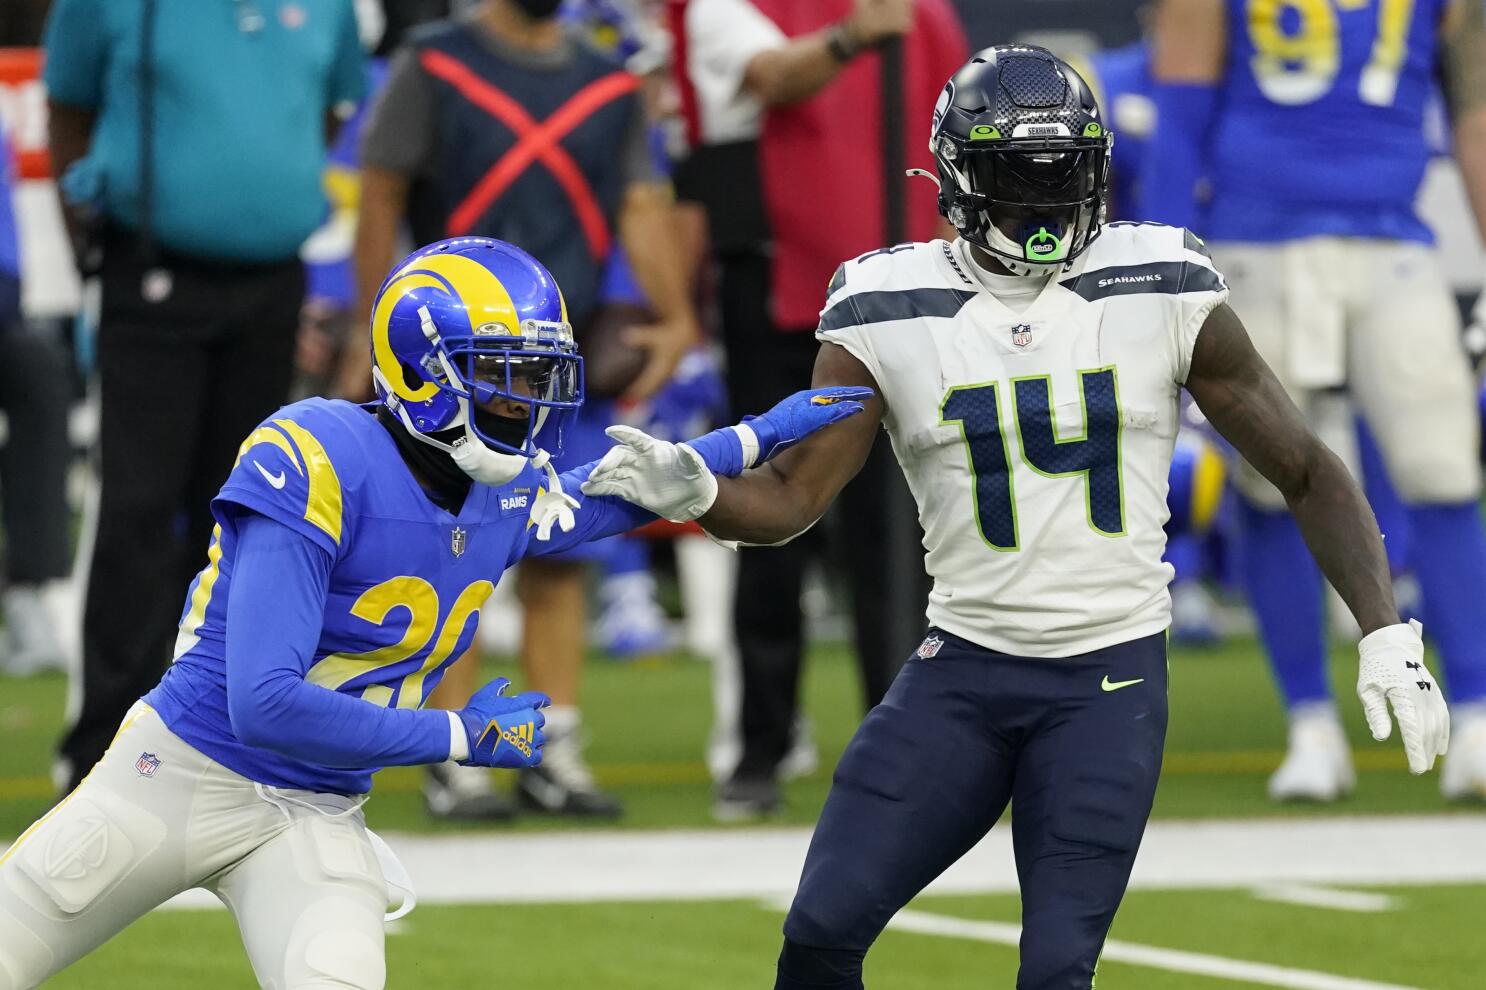 Clayton: First four weeks of 2020 NFL Schedule to feature NFC vs AFC games  - Daily Norseman